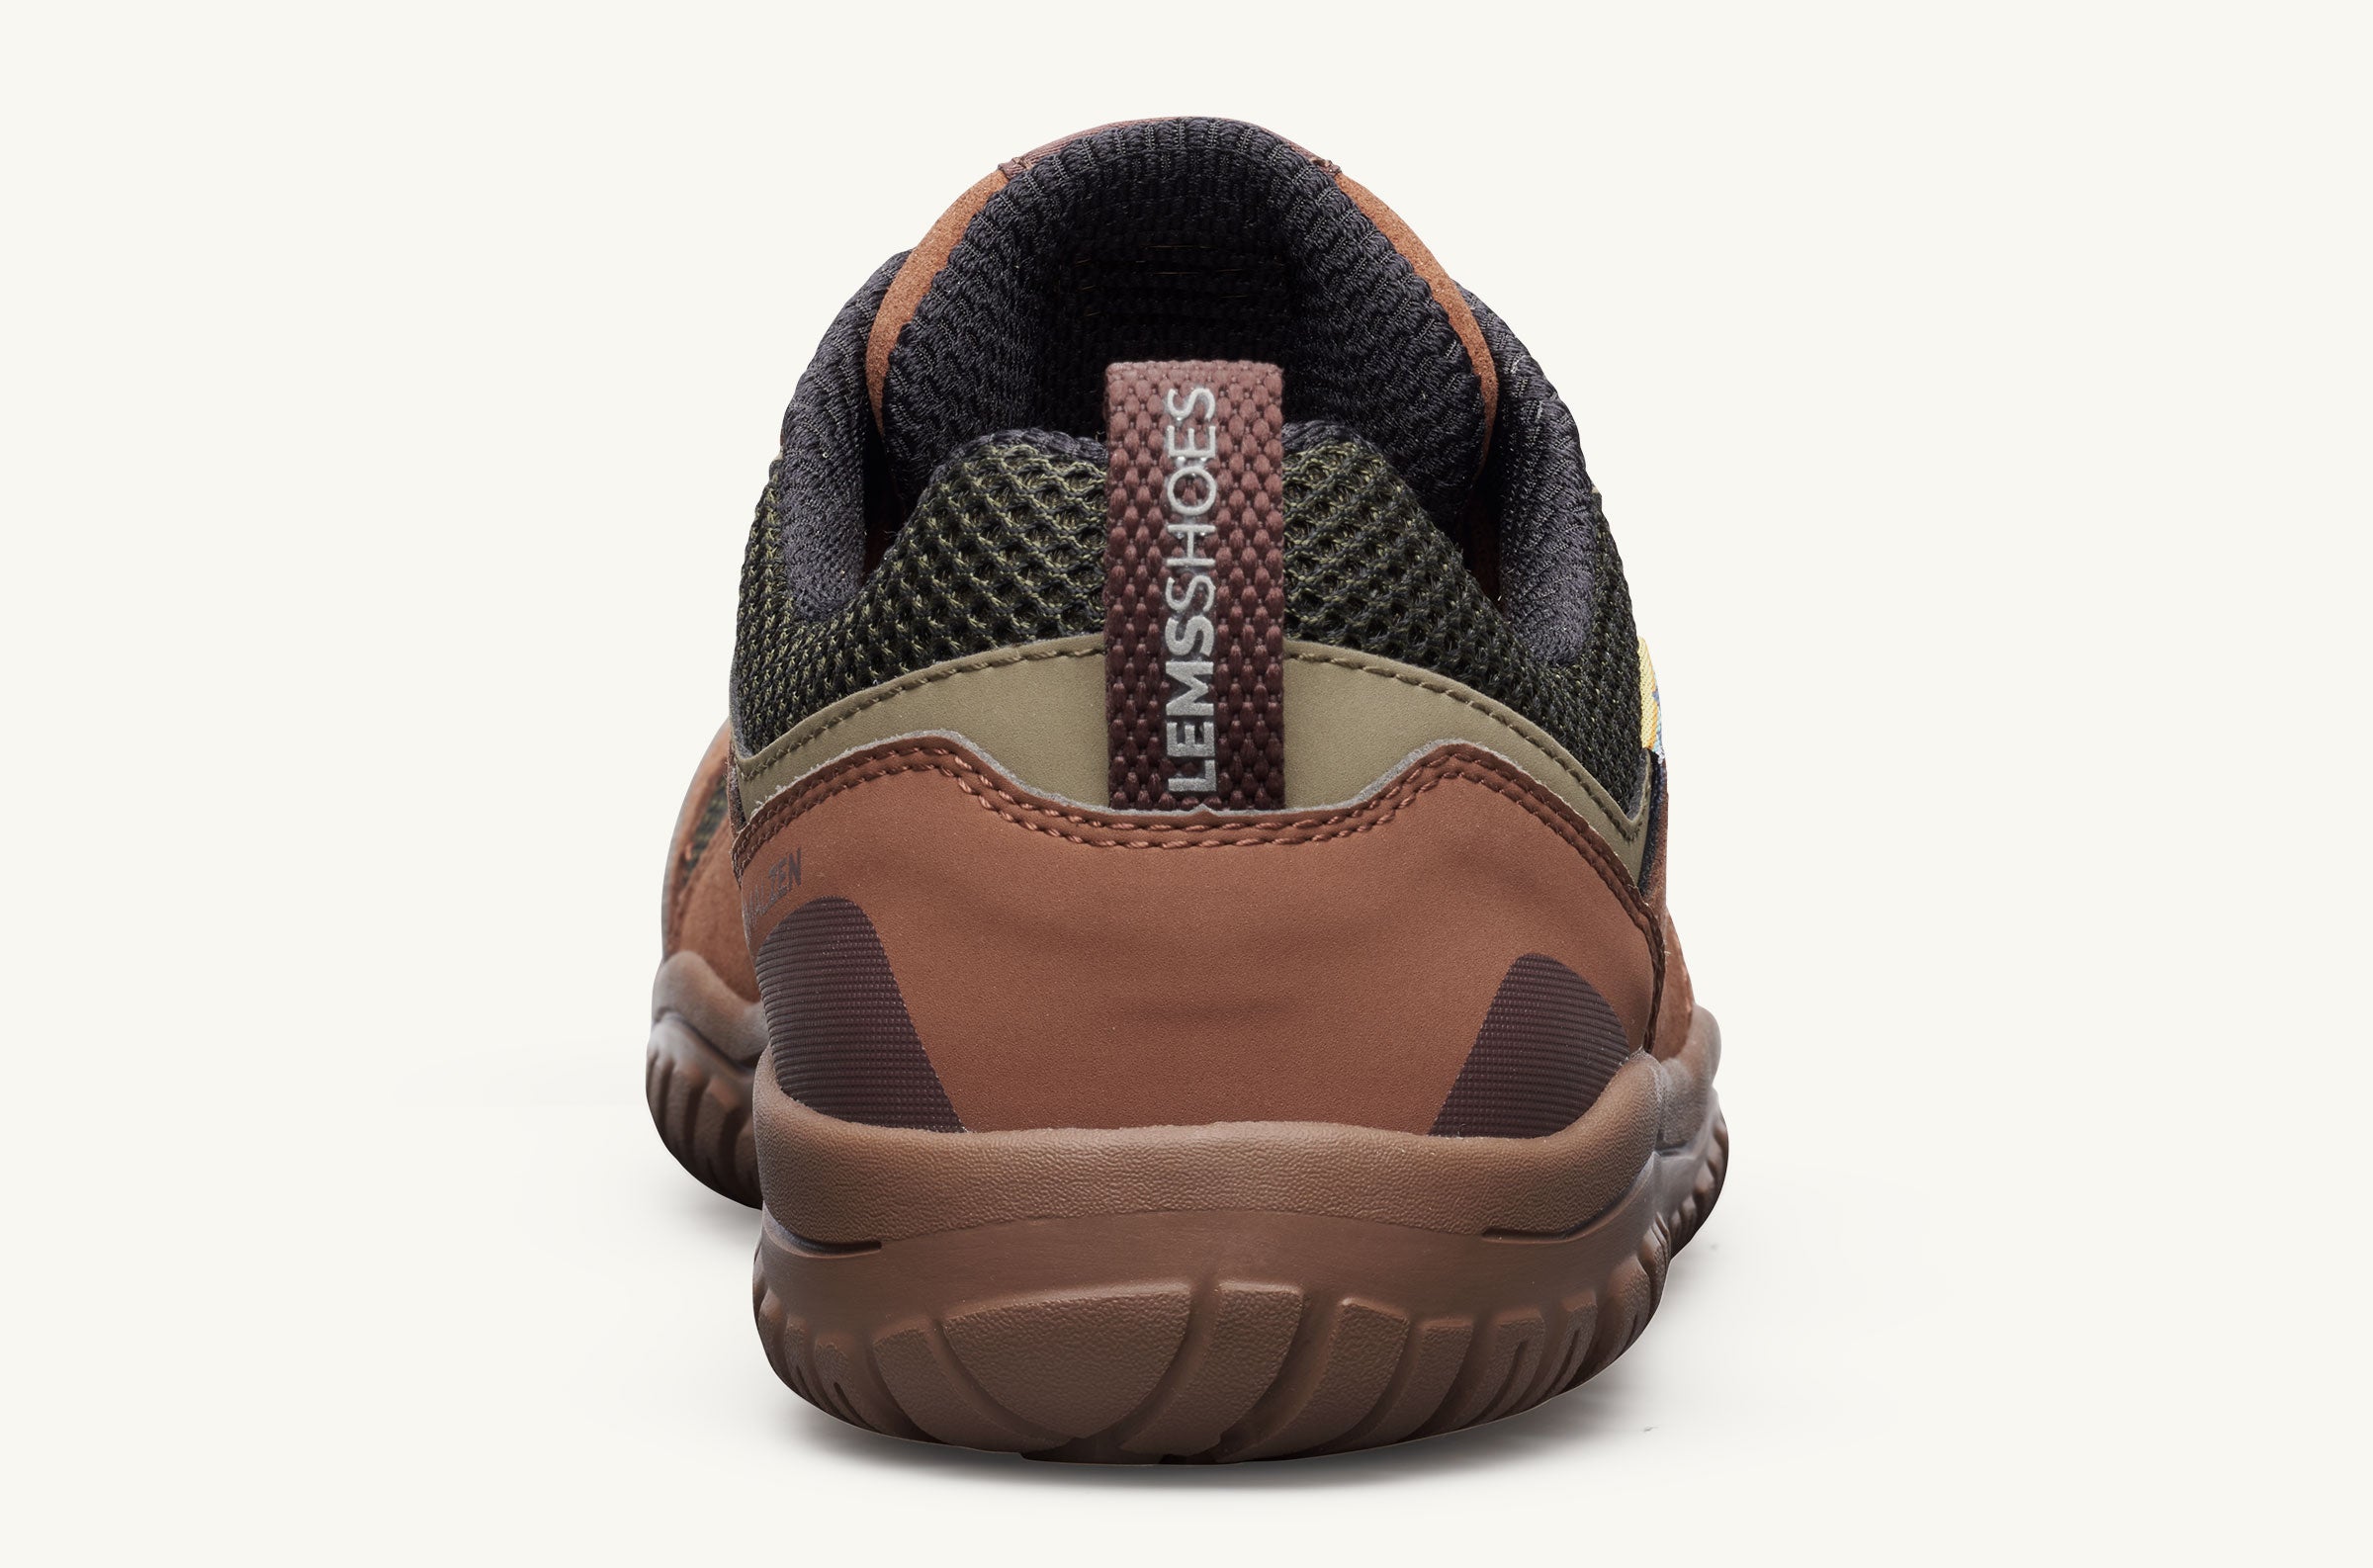 Shop Sneakers for Men from Woodland